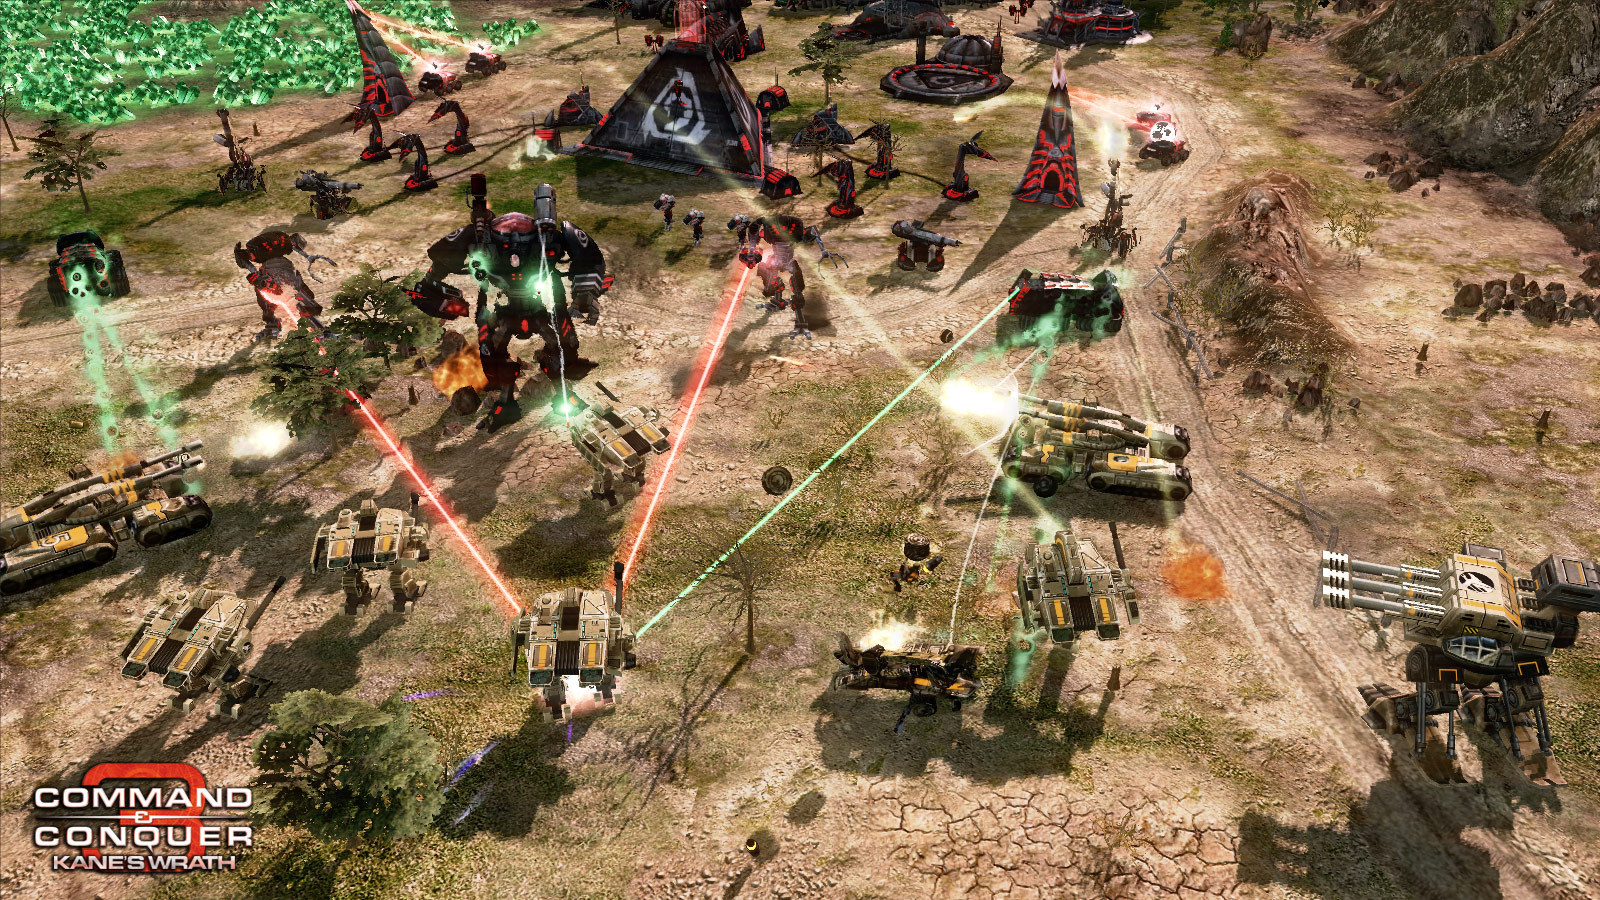 command-and-conquer-3-kane-wrath-1-01-crack-listokarco-s-blog